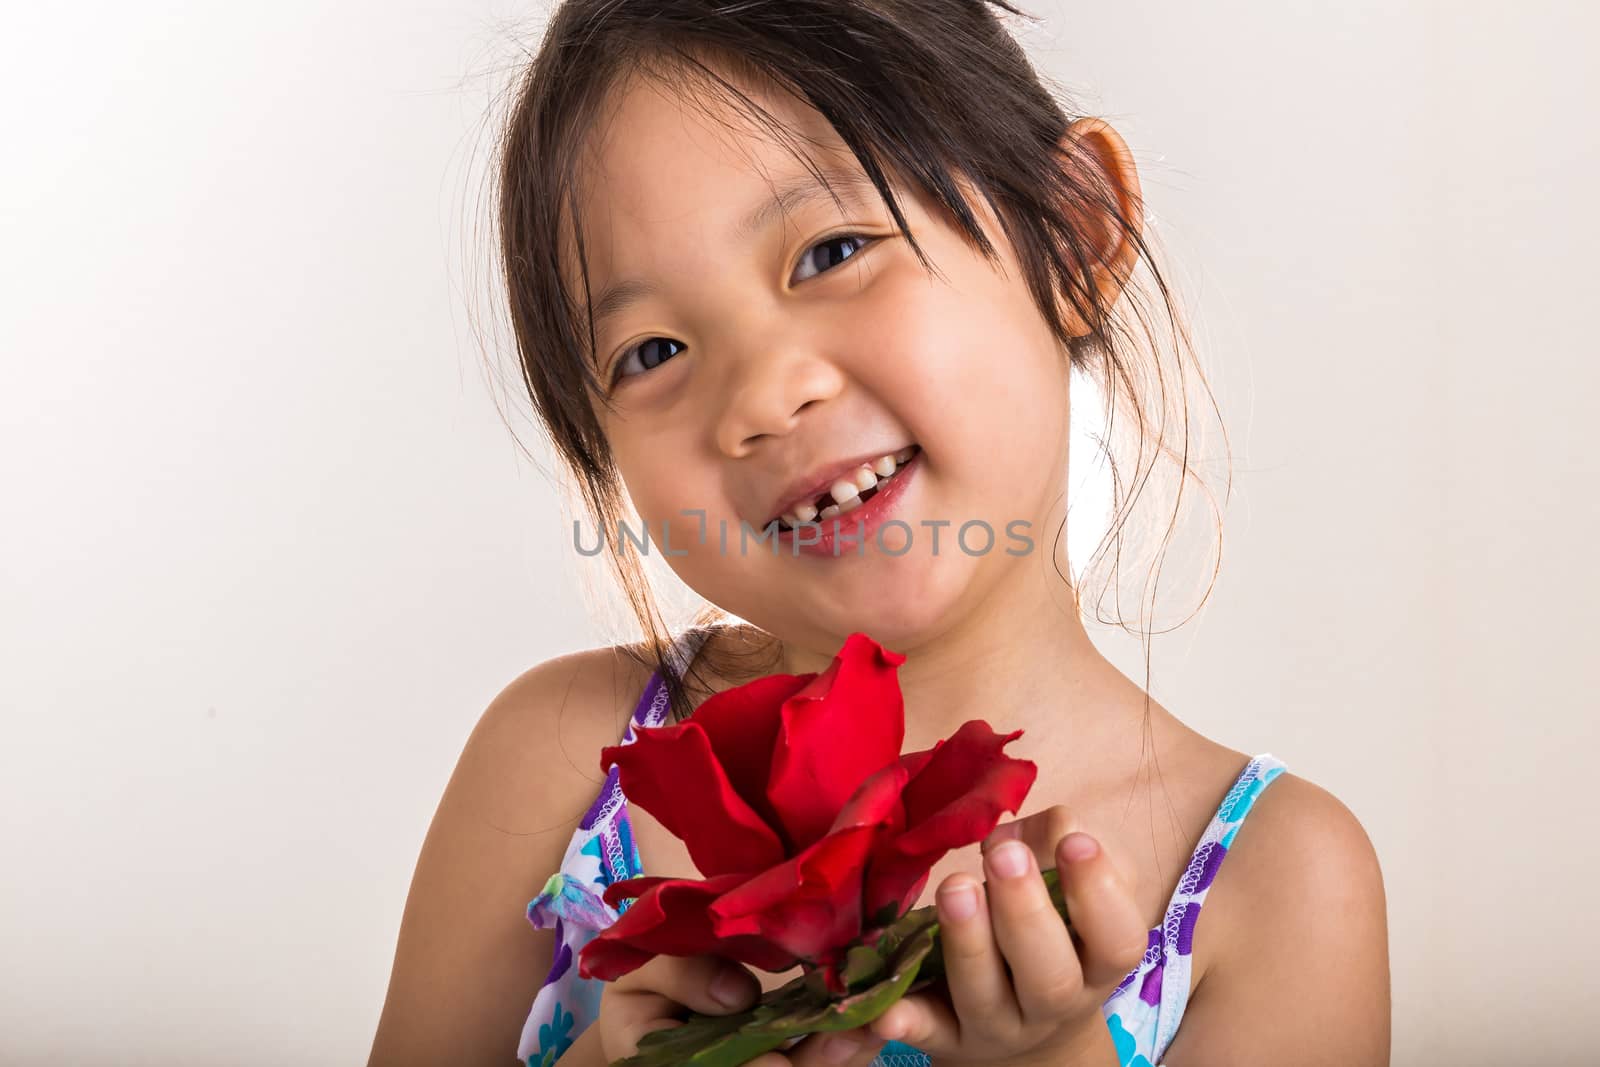 Child is holding red rose in her hands background.